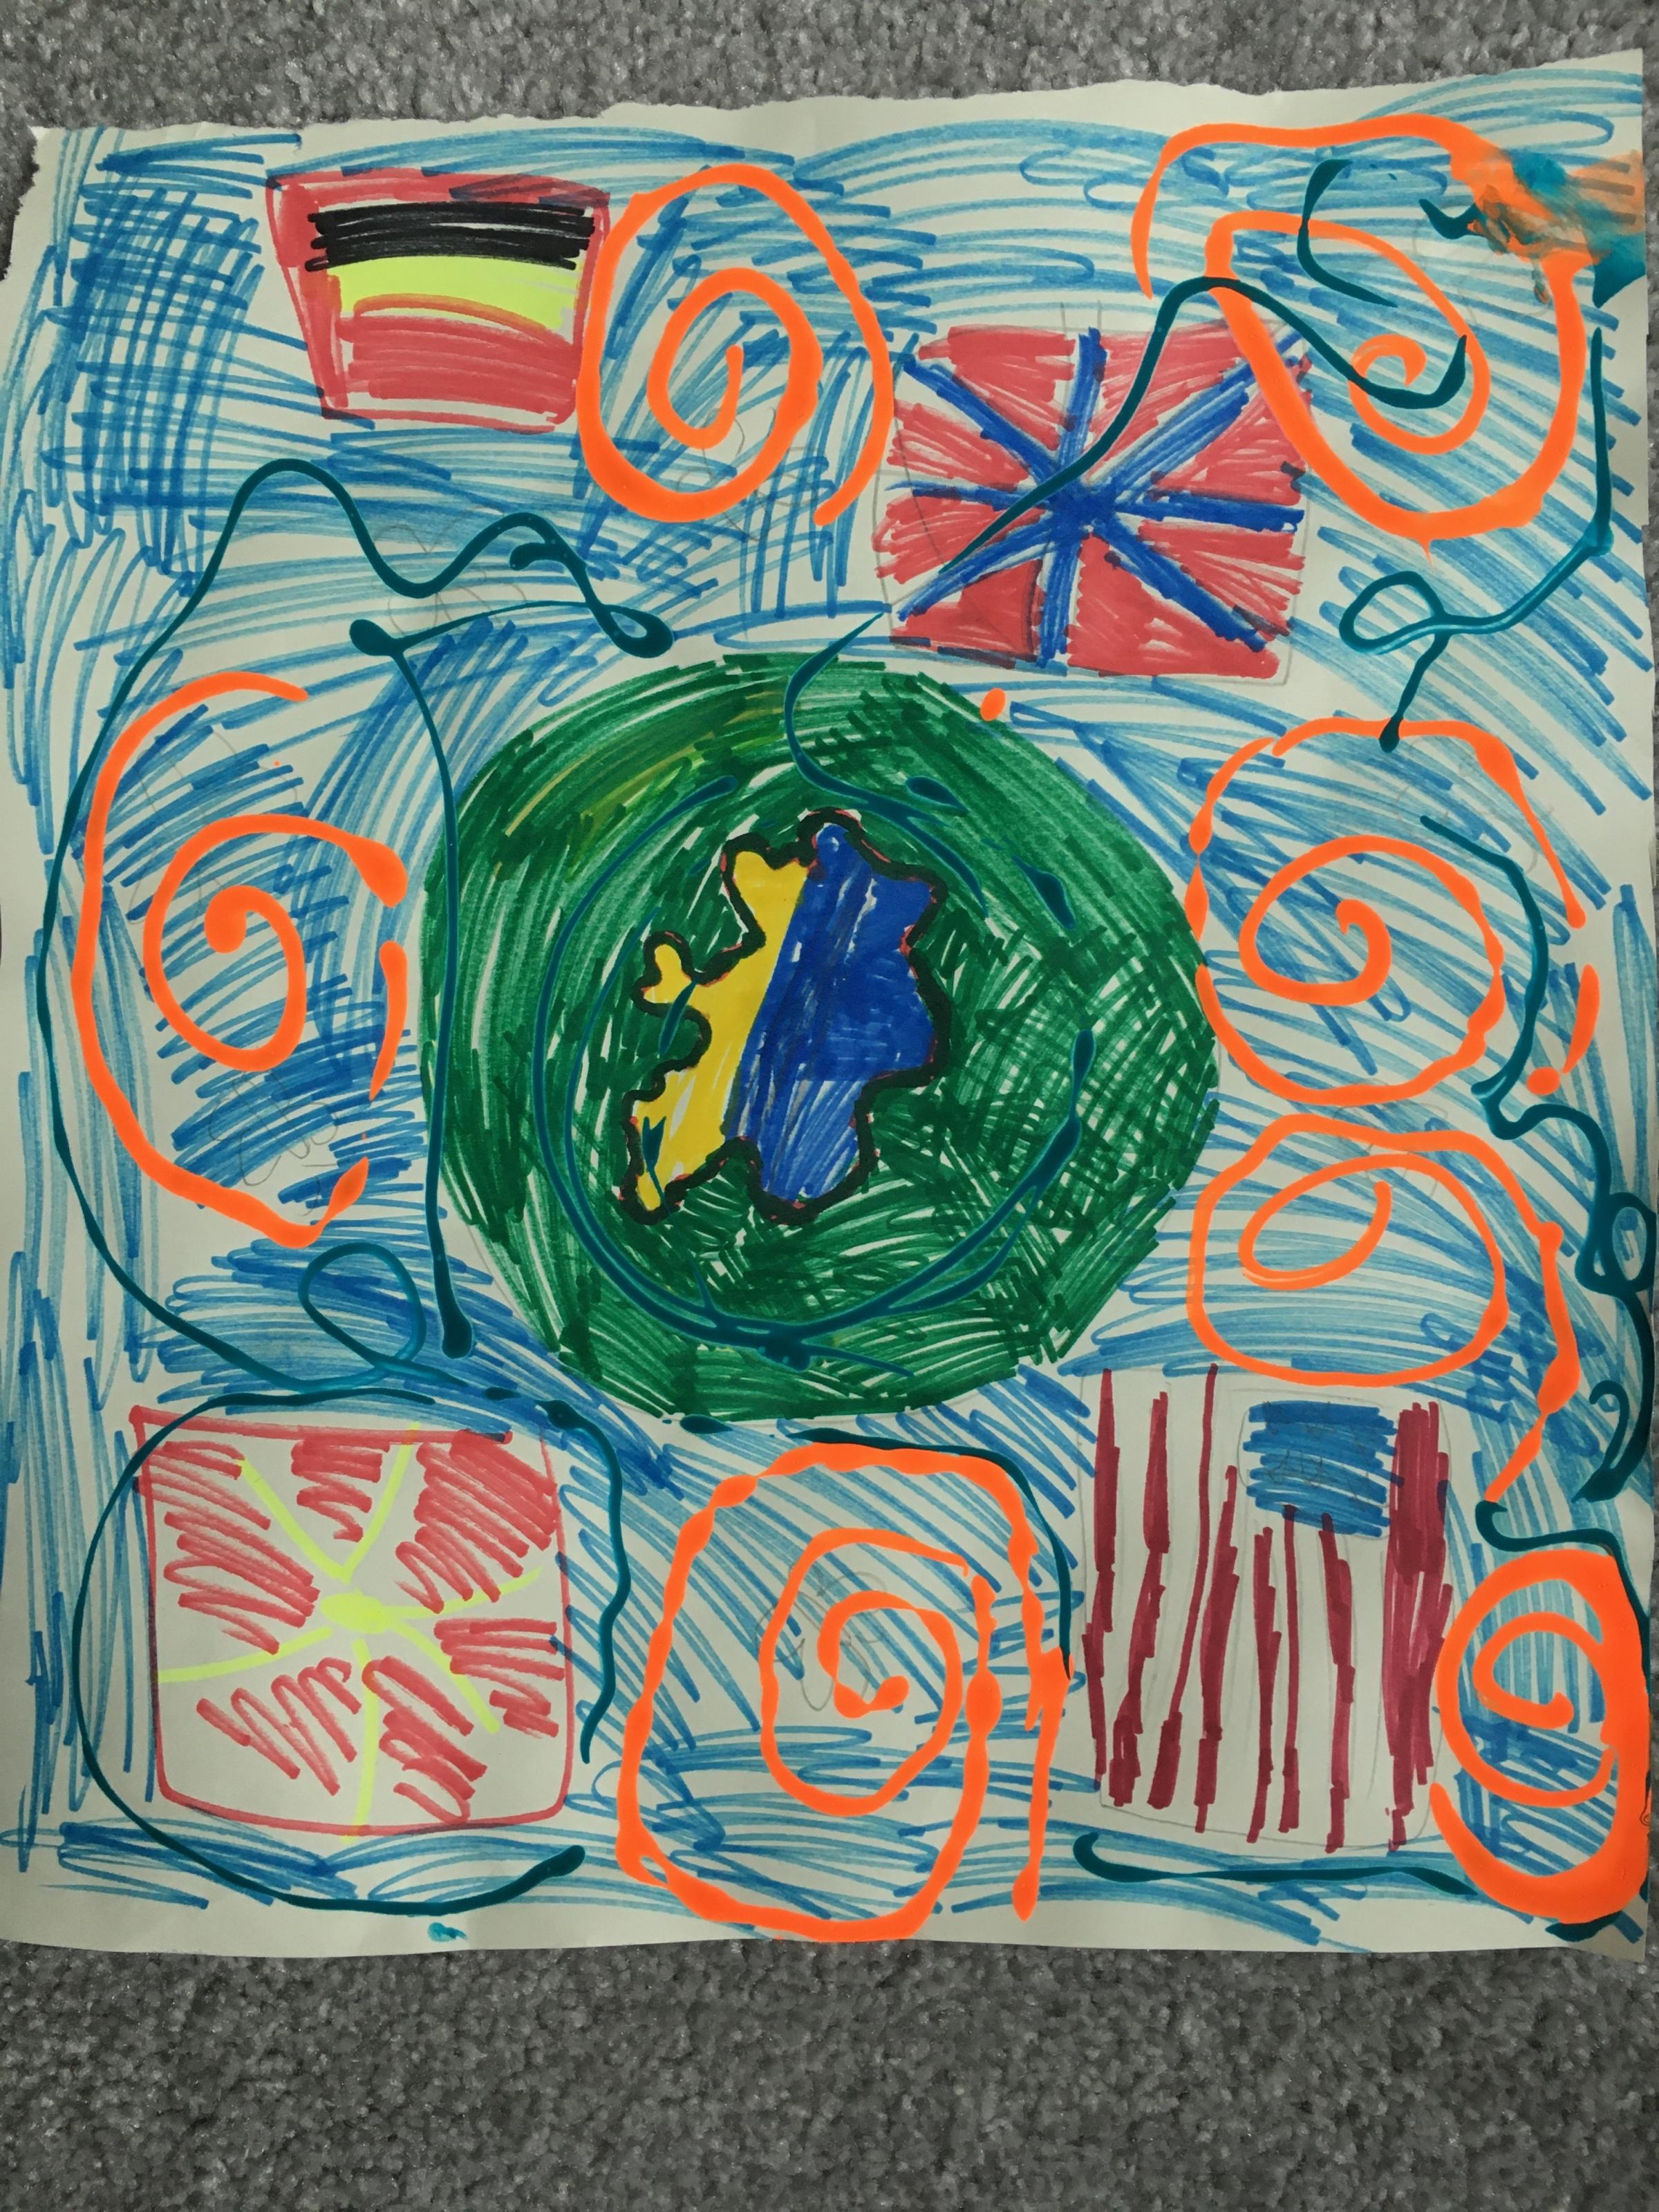 ‘Let all countries in the word be friends’ - a drawing by Nastya, seven, one of many pictures by Ukrainian children that the Council has been sharing on social media channels during Refugee Week.